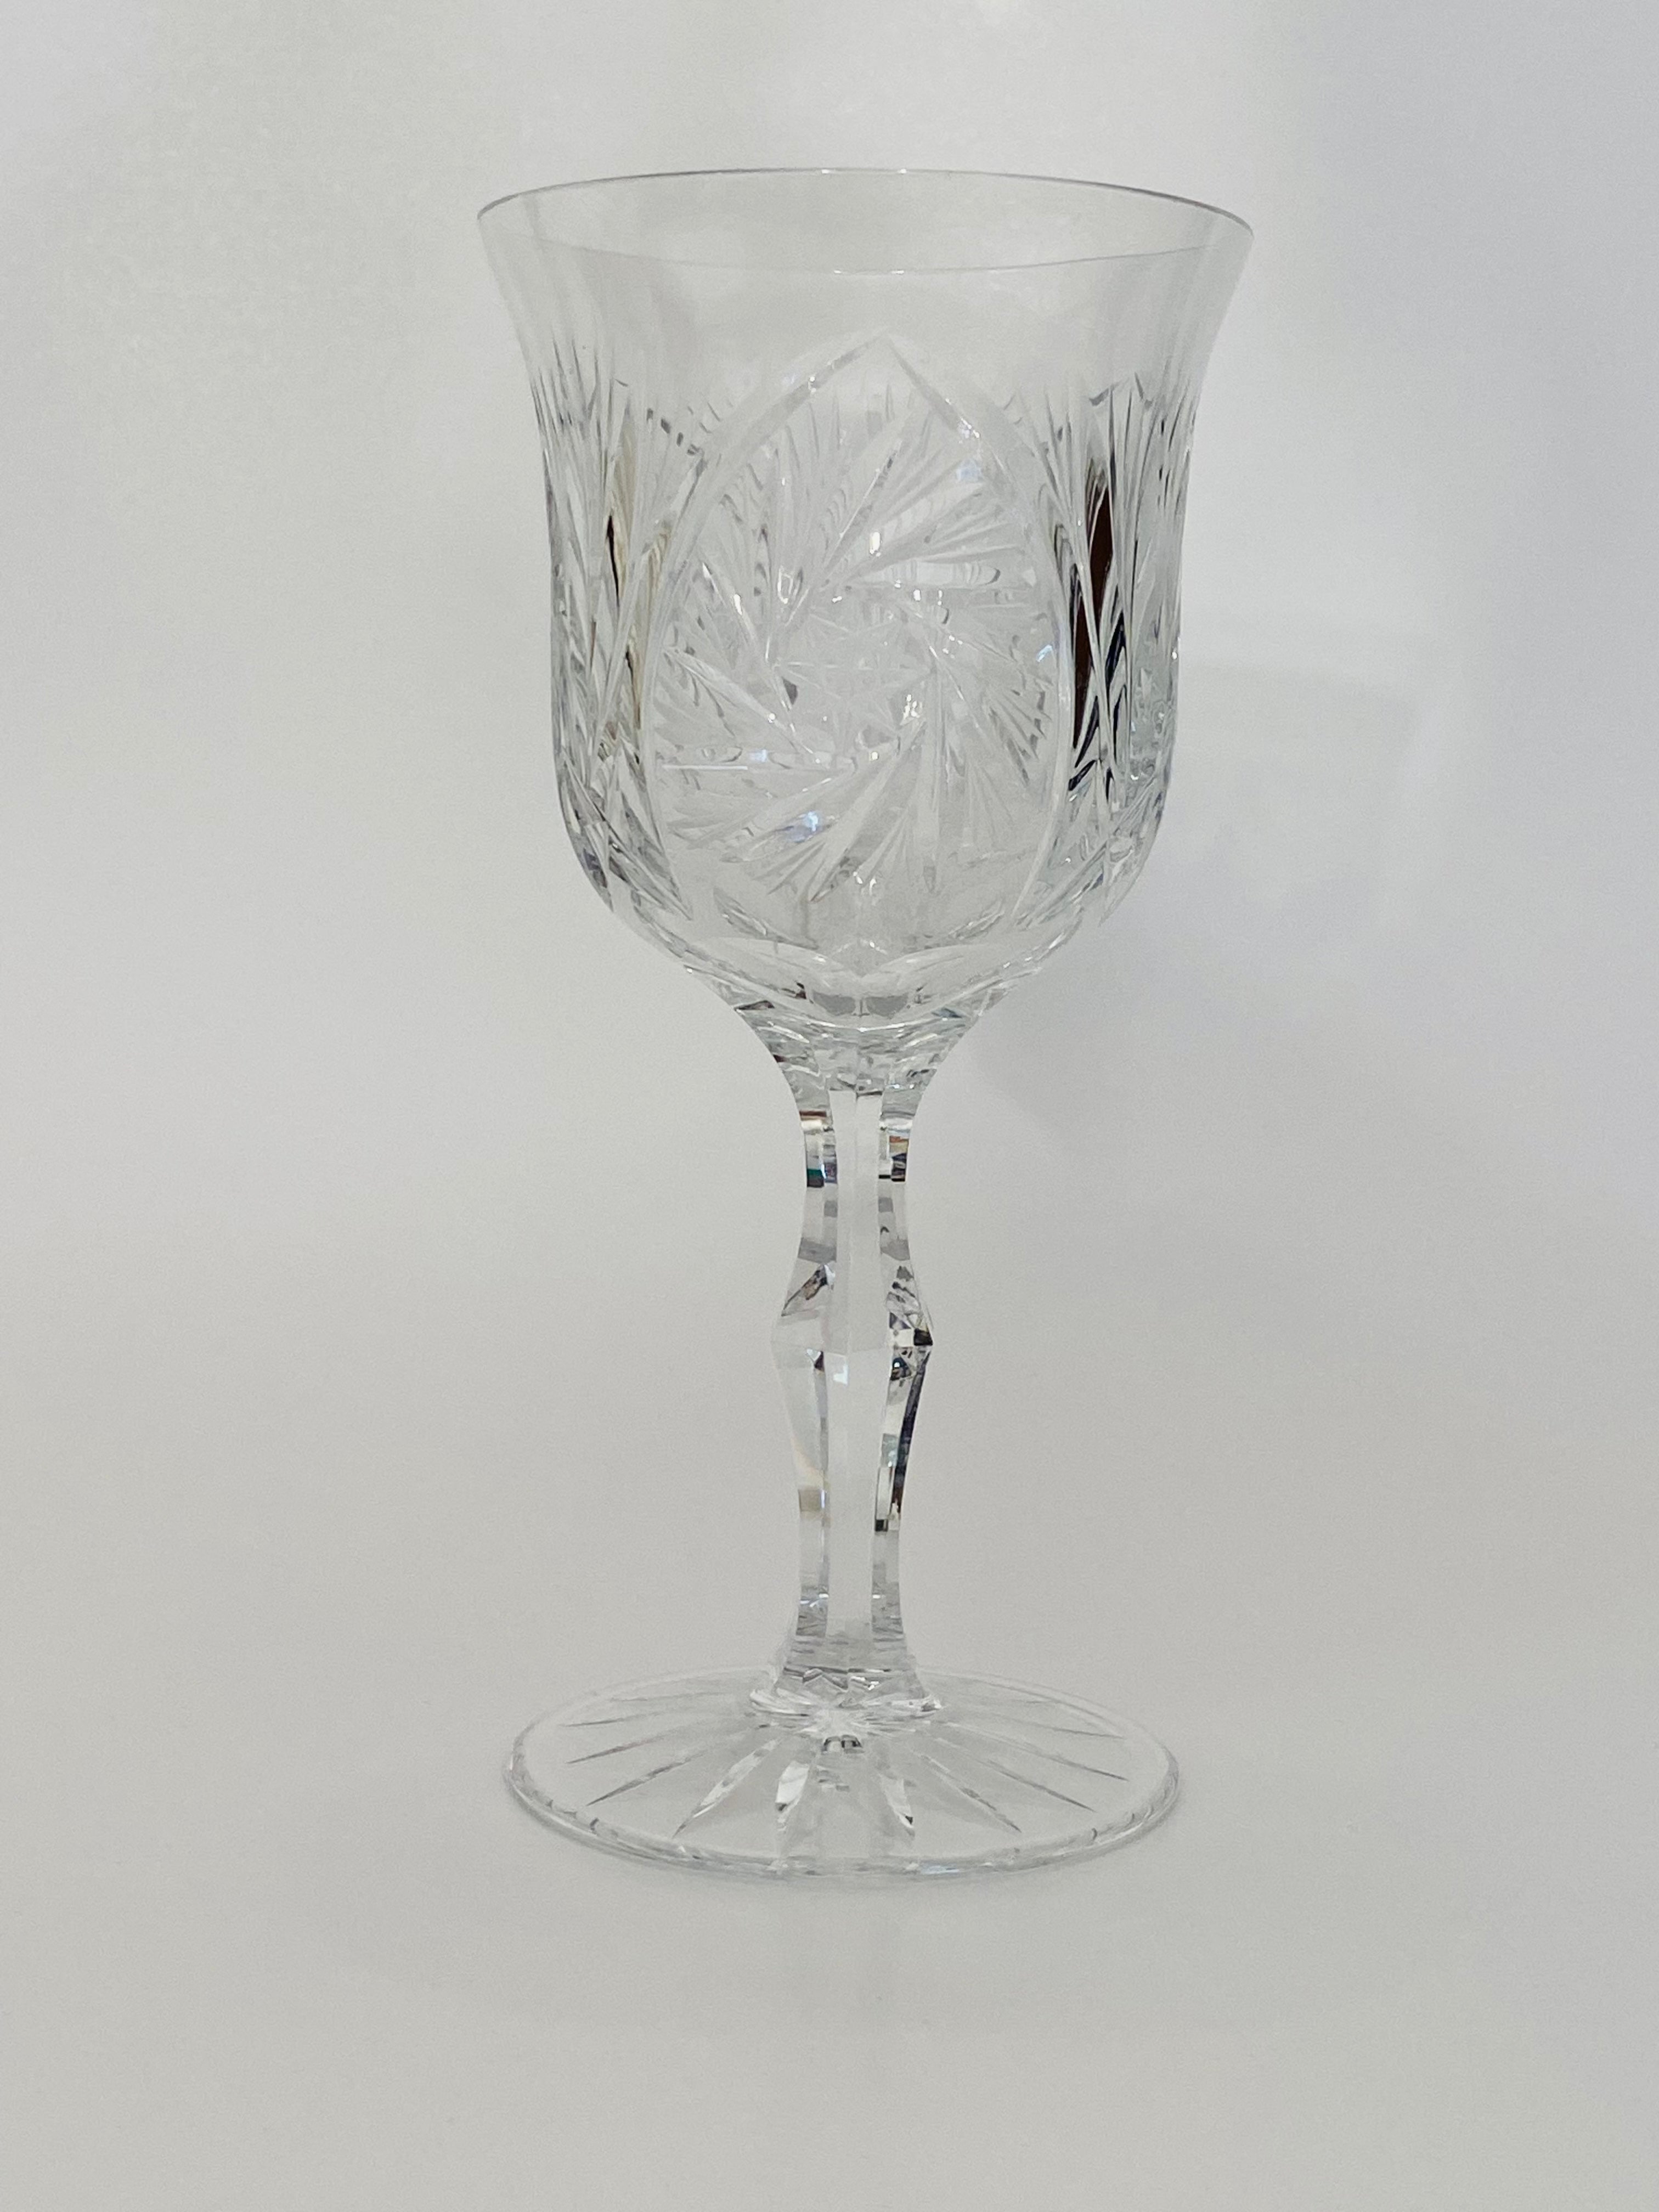 VINTAGE CRYSTAL GLASSES: Cristal D'arques Durand Longchamp Glassware  Collection Cut Crystal Stemware Several Styles Available 